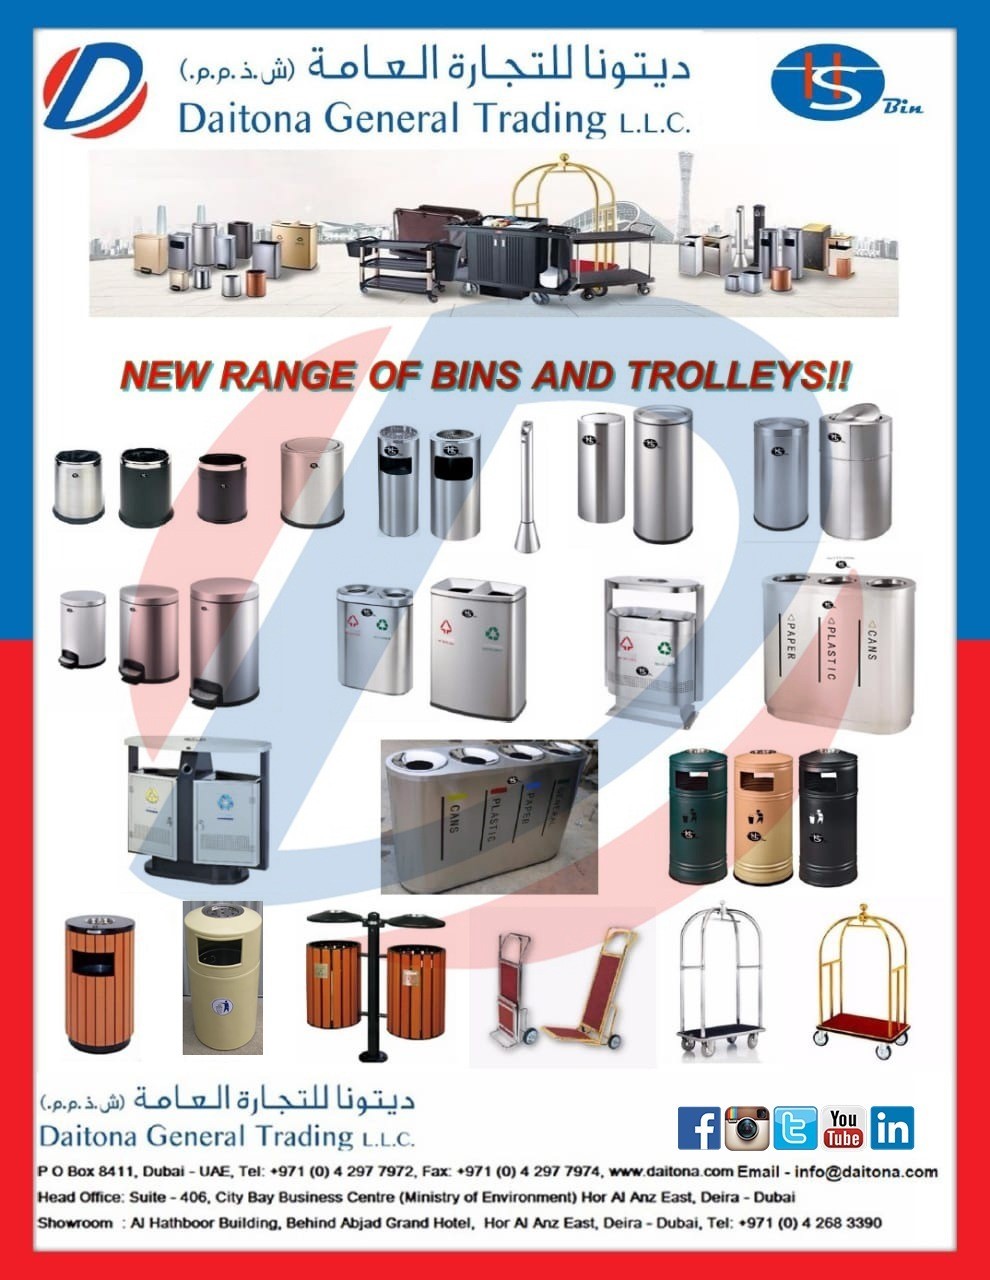 Hs Stainless Steel Bins and Trolleys New Stock was Arrived